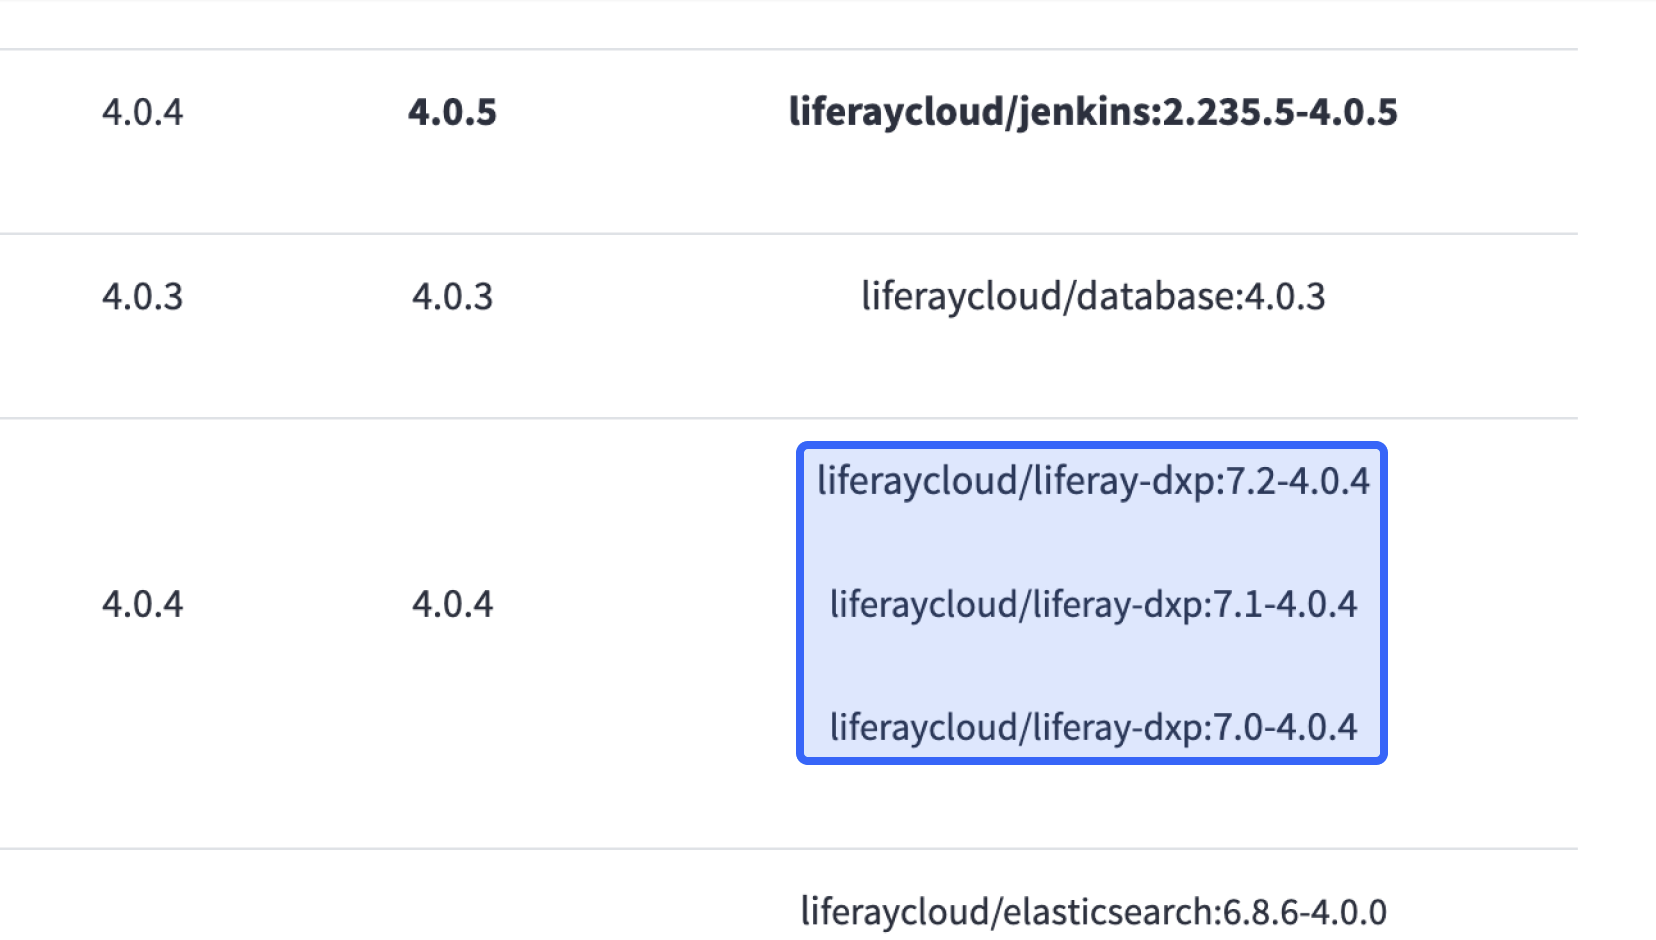 From the Liferay service images listed, pick the one that matches your Liferay installation's major version.